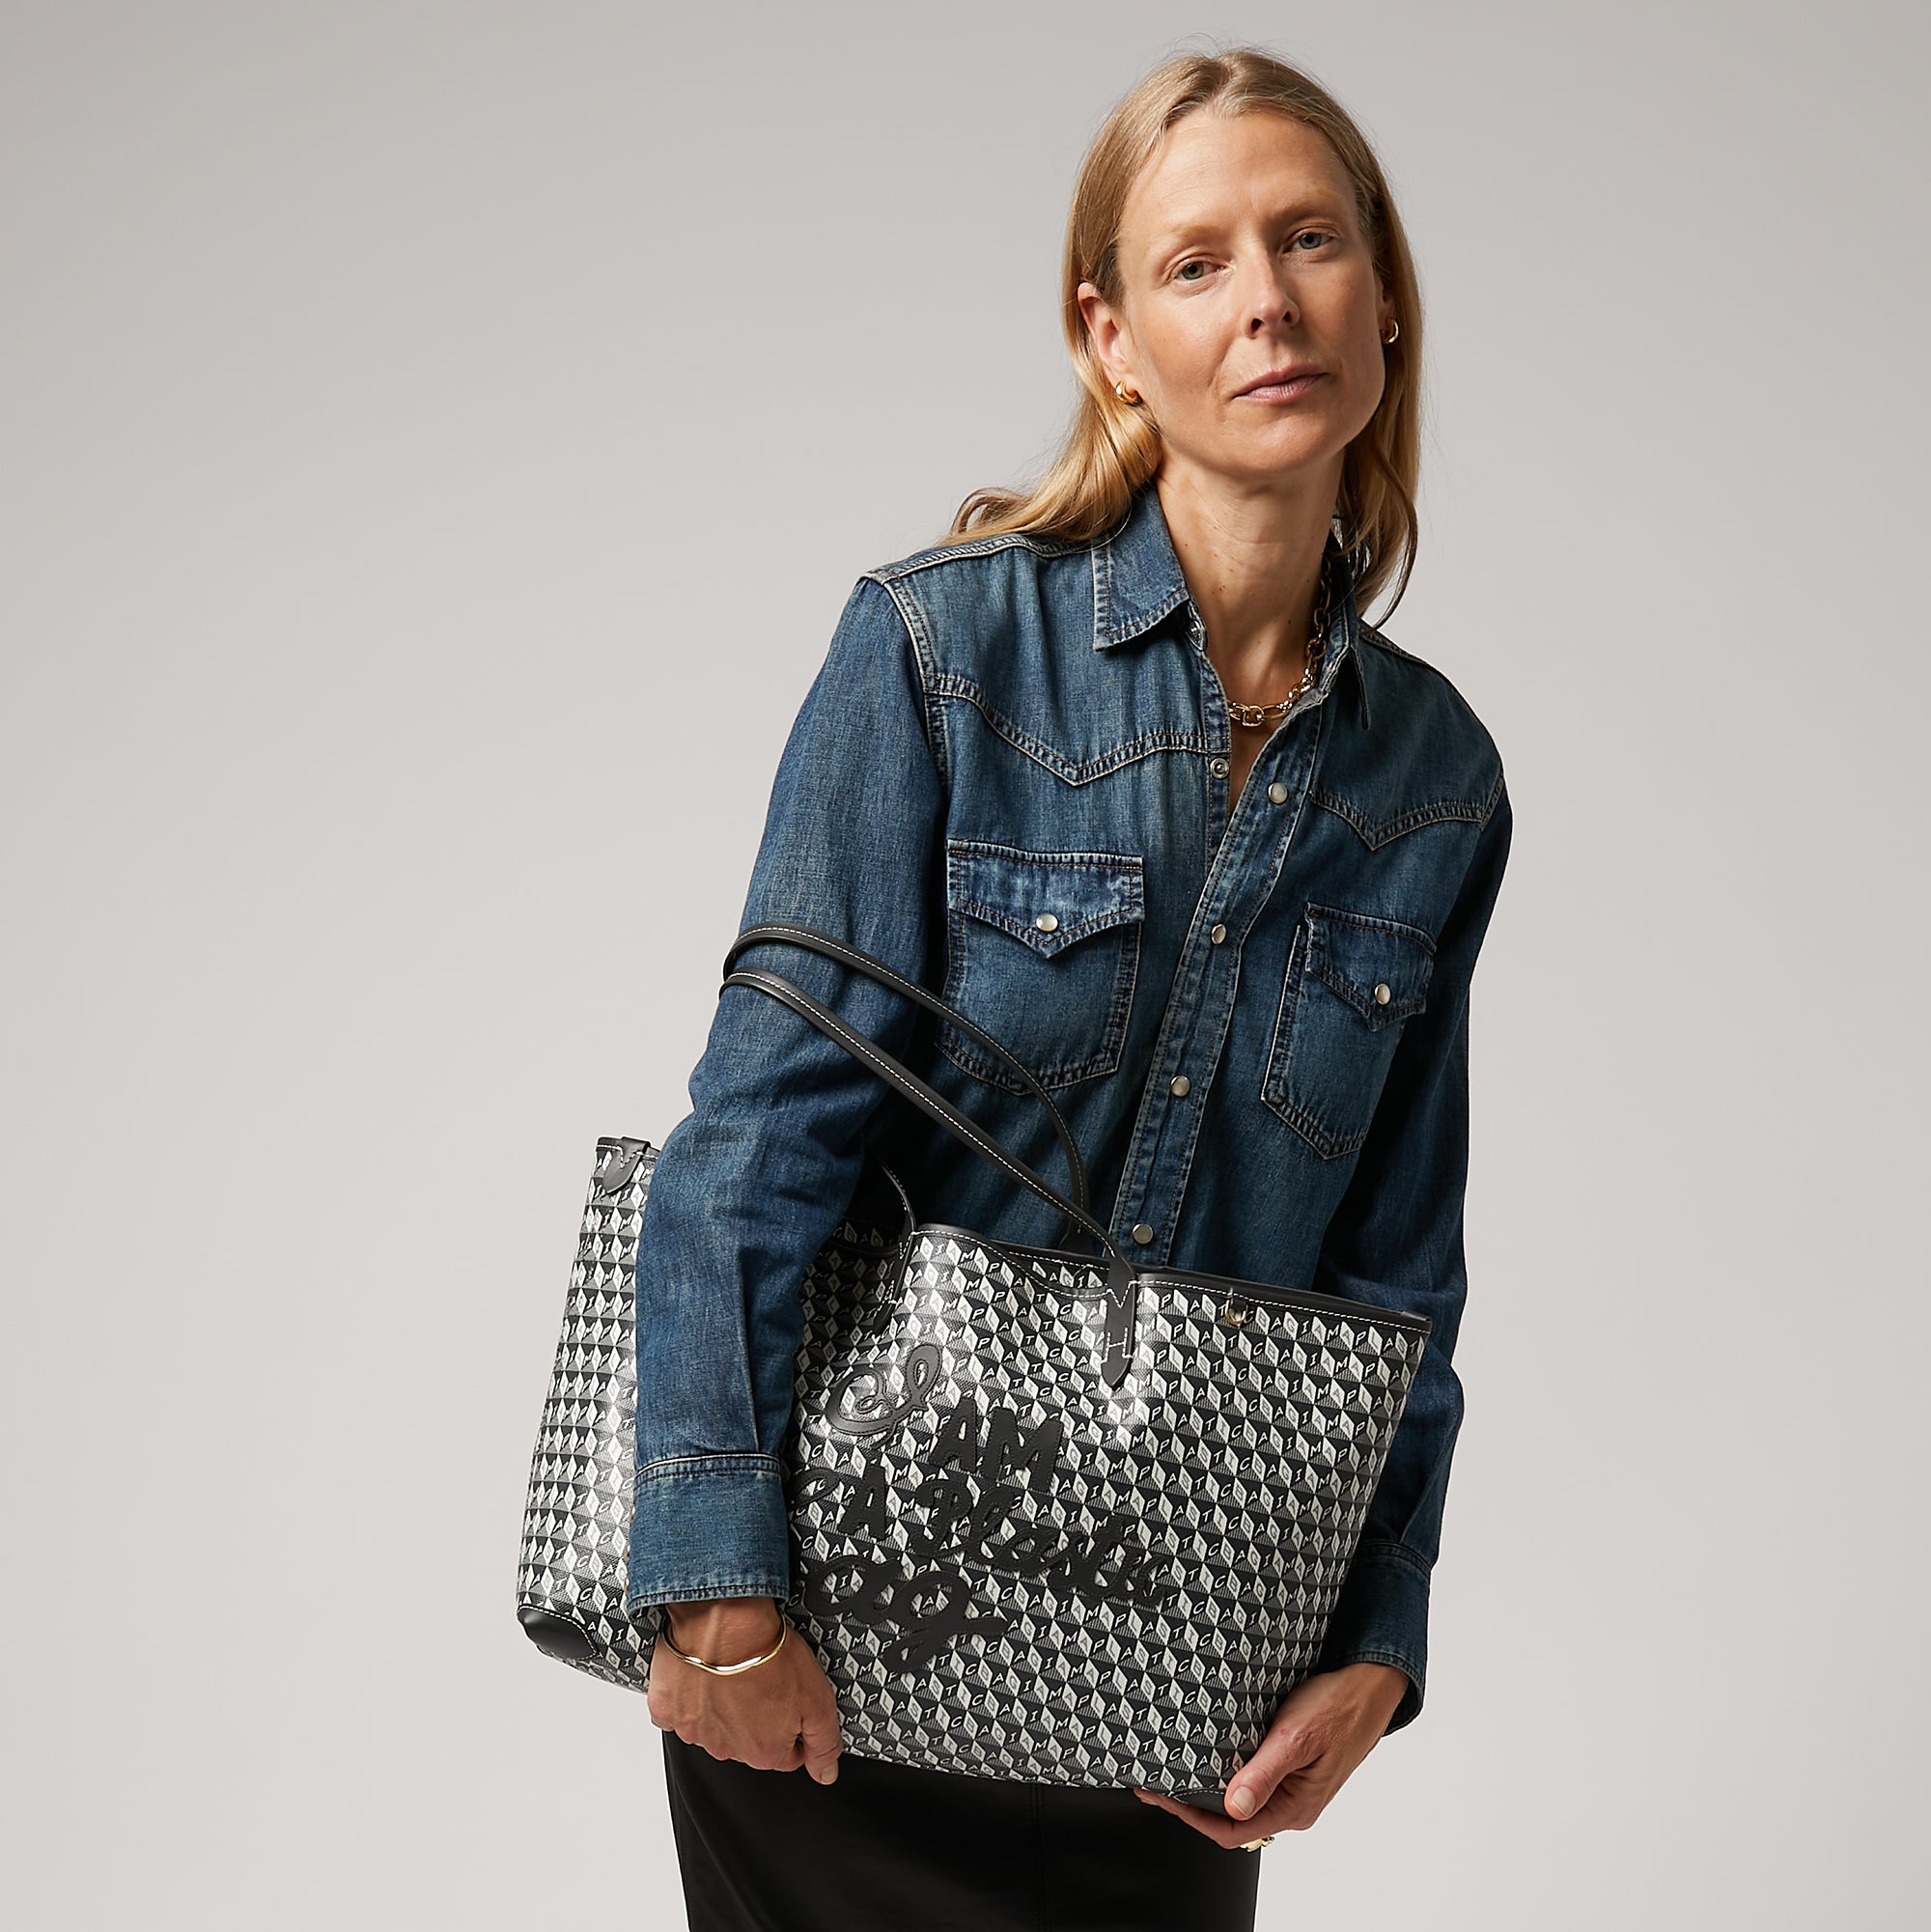 「I AM A Plastic Bag」 モチーフトート -

                  
                    Recycled coated canvas in Charcoal -
                  

                  Anya Hindmarch JP
